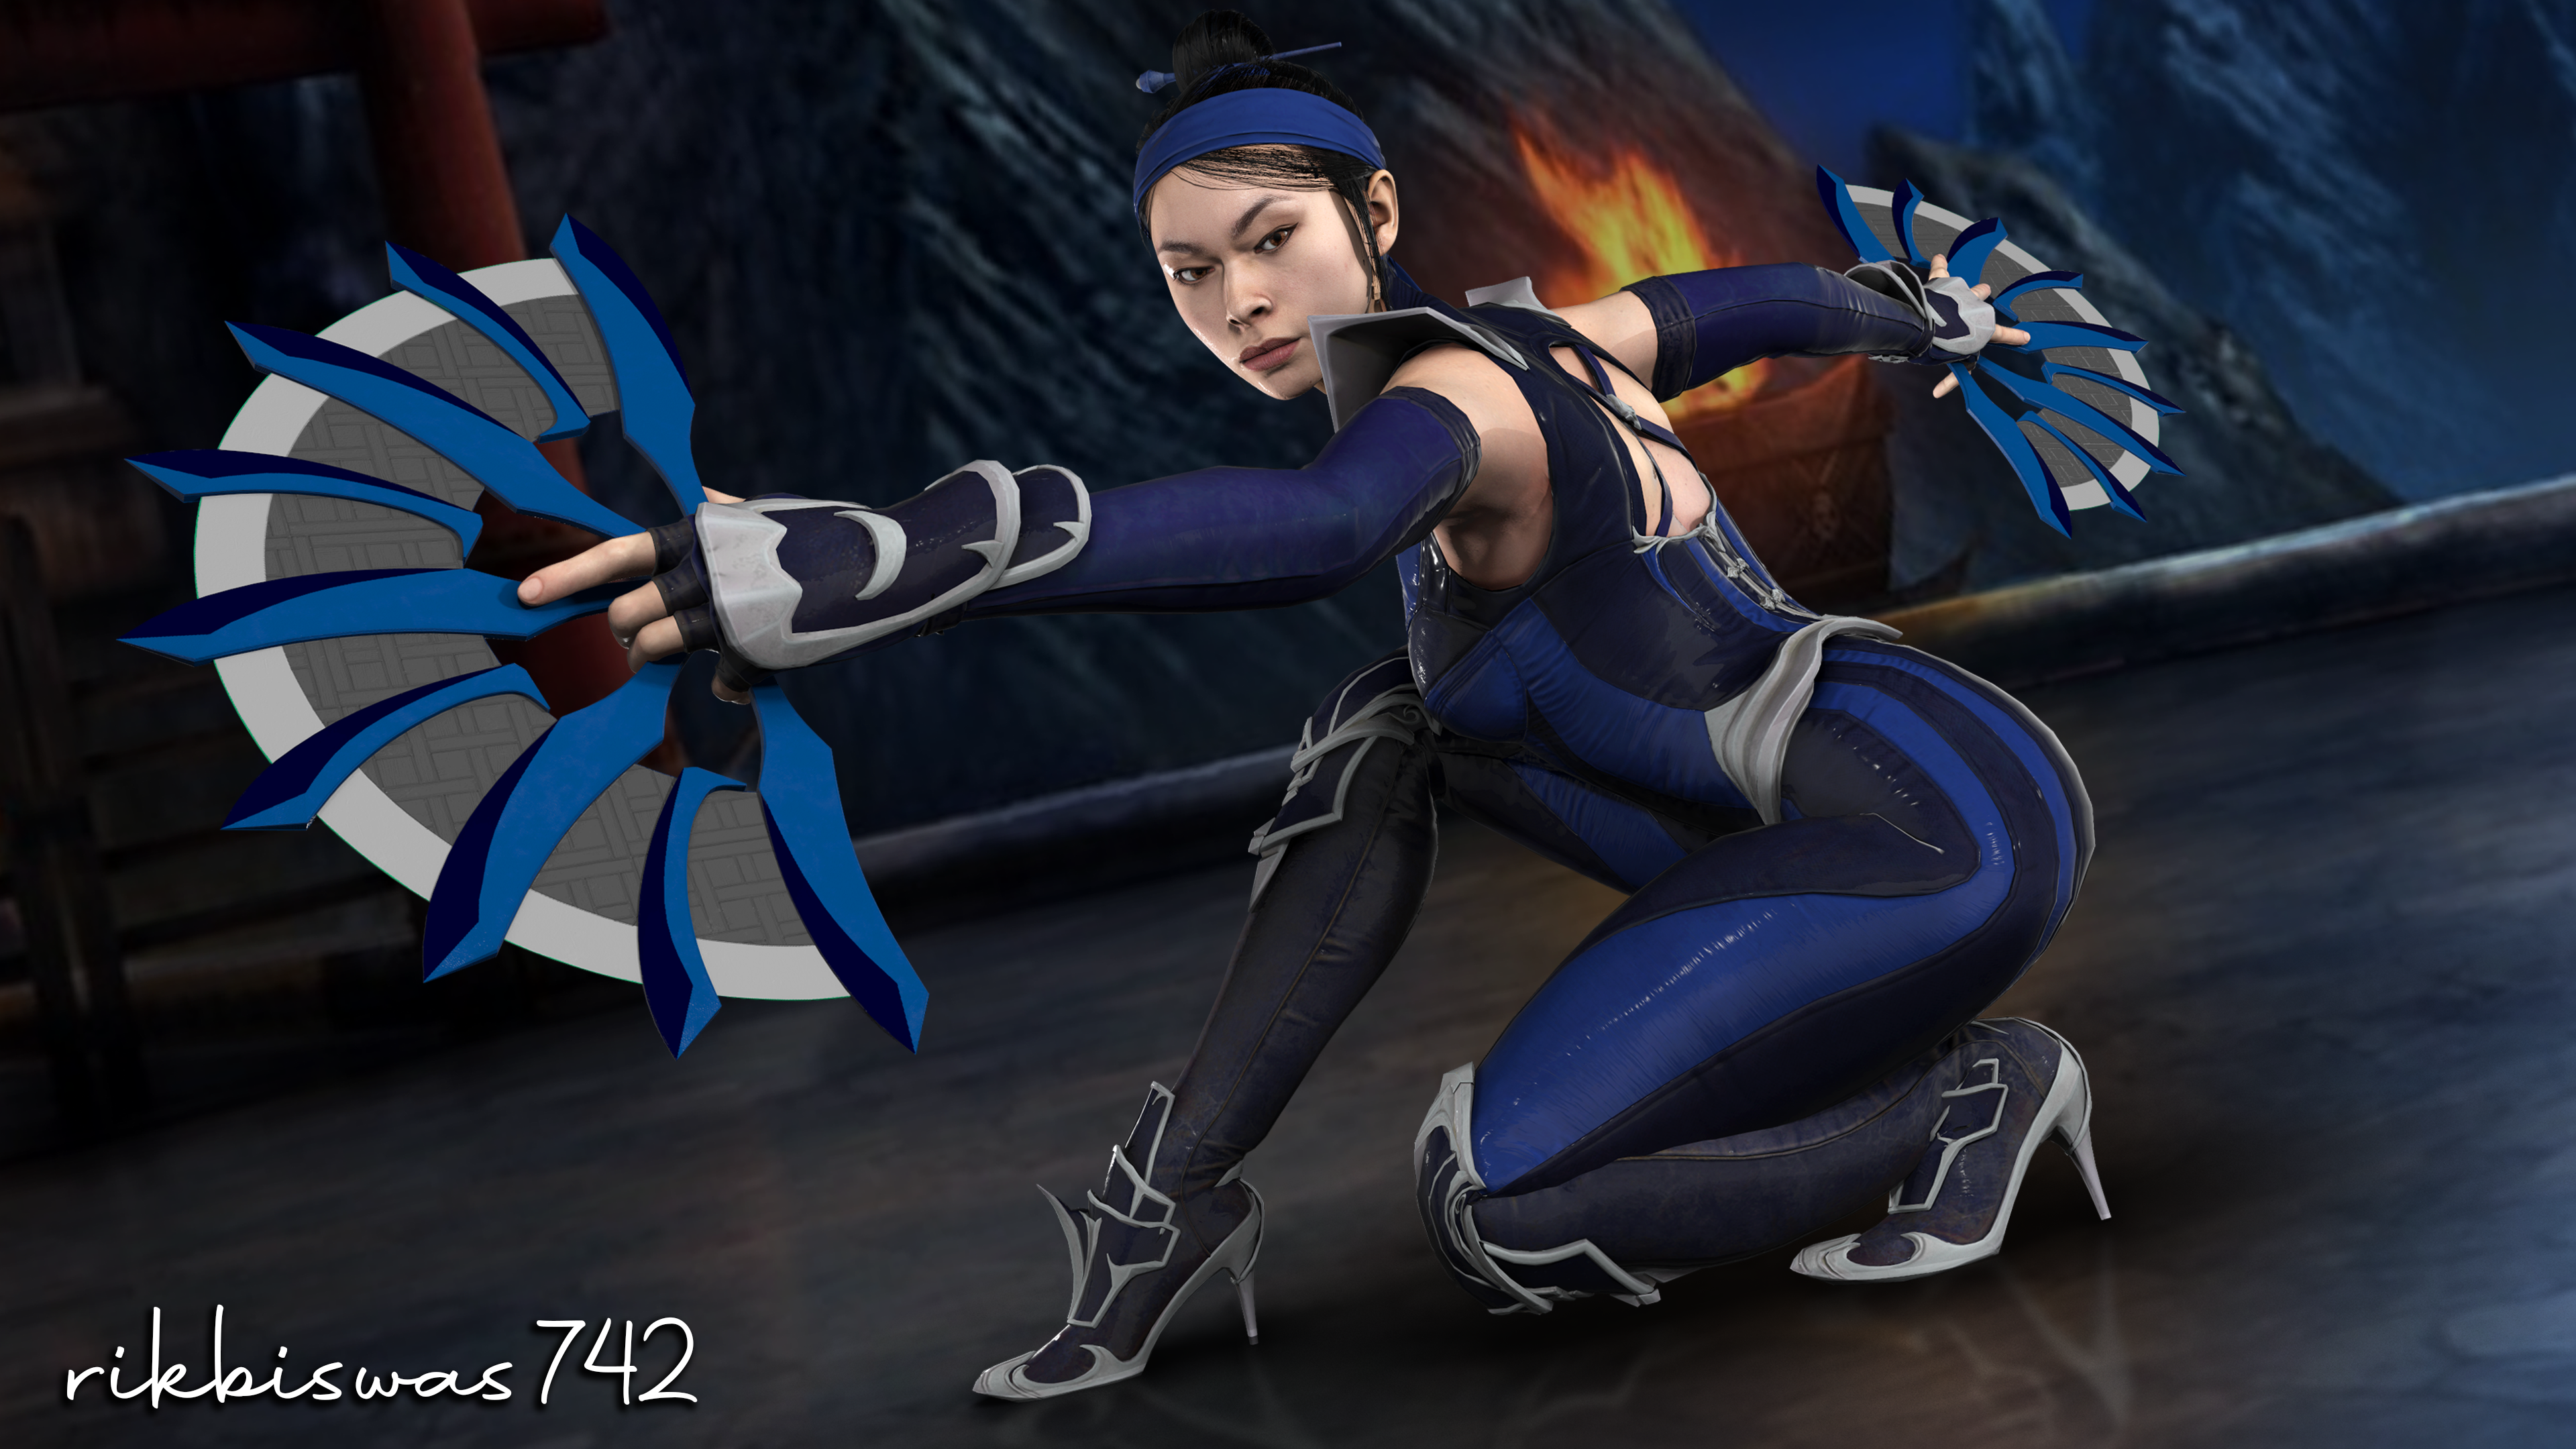 Kitana Wallpaper (4k resolution), made by me. If you want you can use it. Please do credit me if you use it. I recreated the entire pose manually